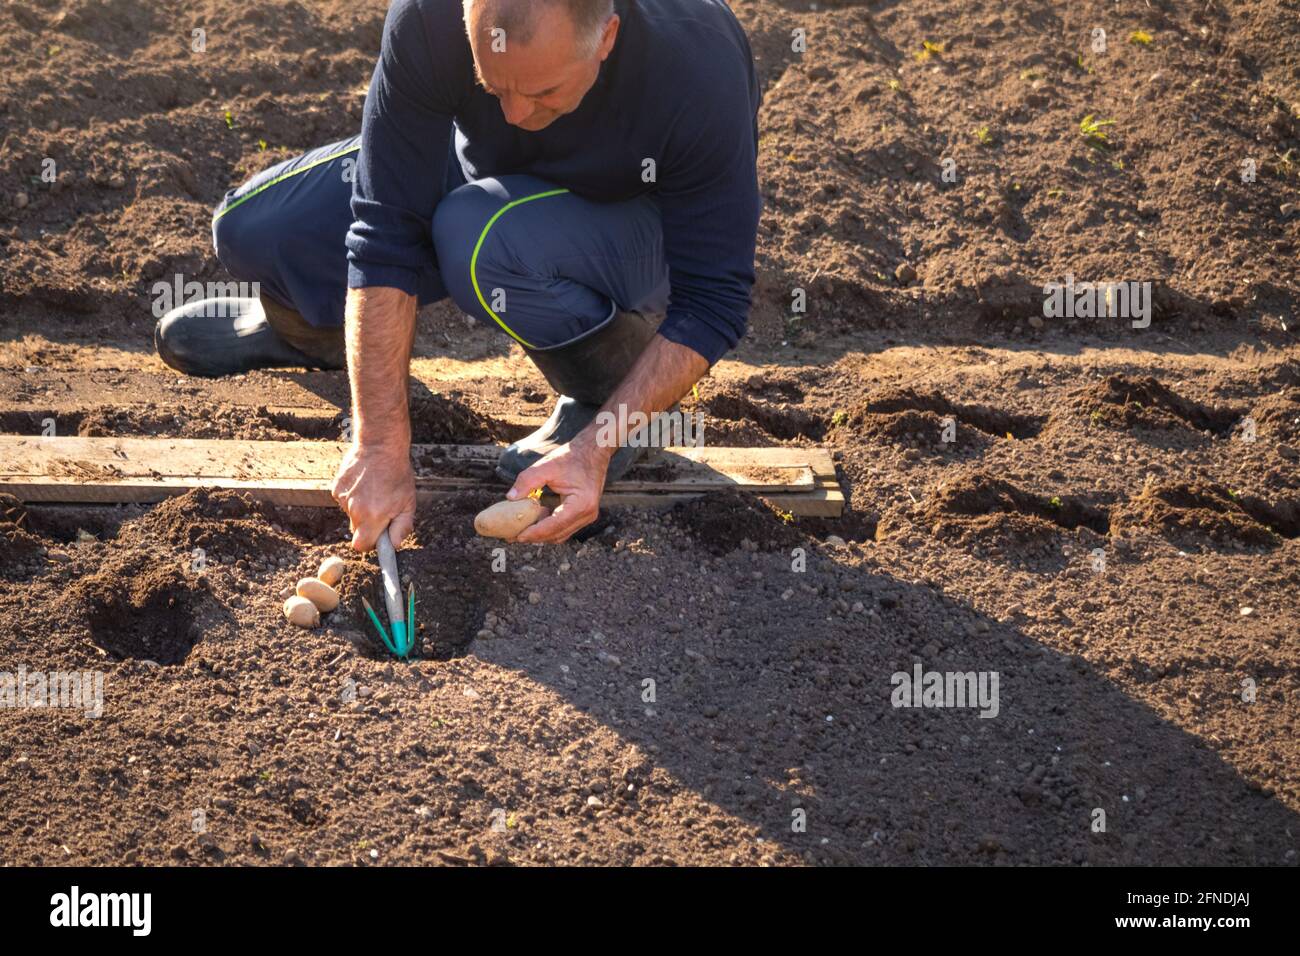 Caucasian man squatting in the field, and planting potato in a hole in the ground, digging with a garden hoe Stock Photo